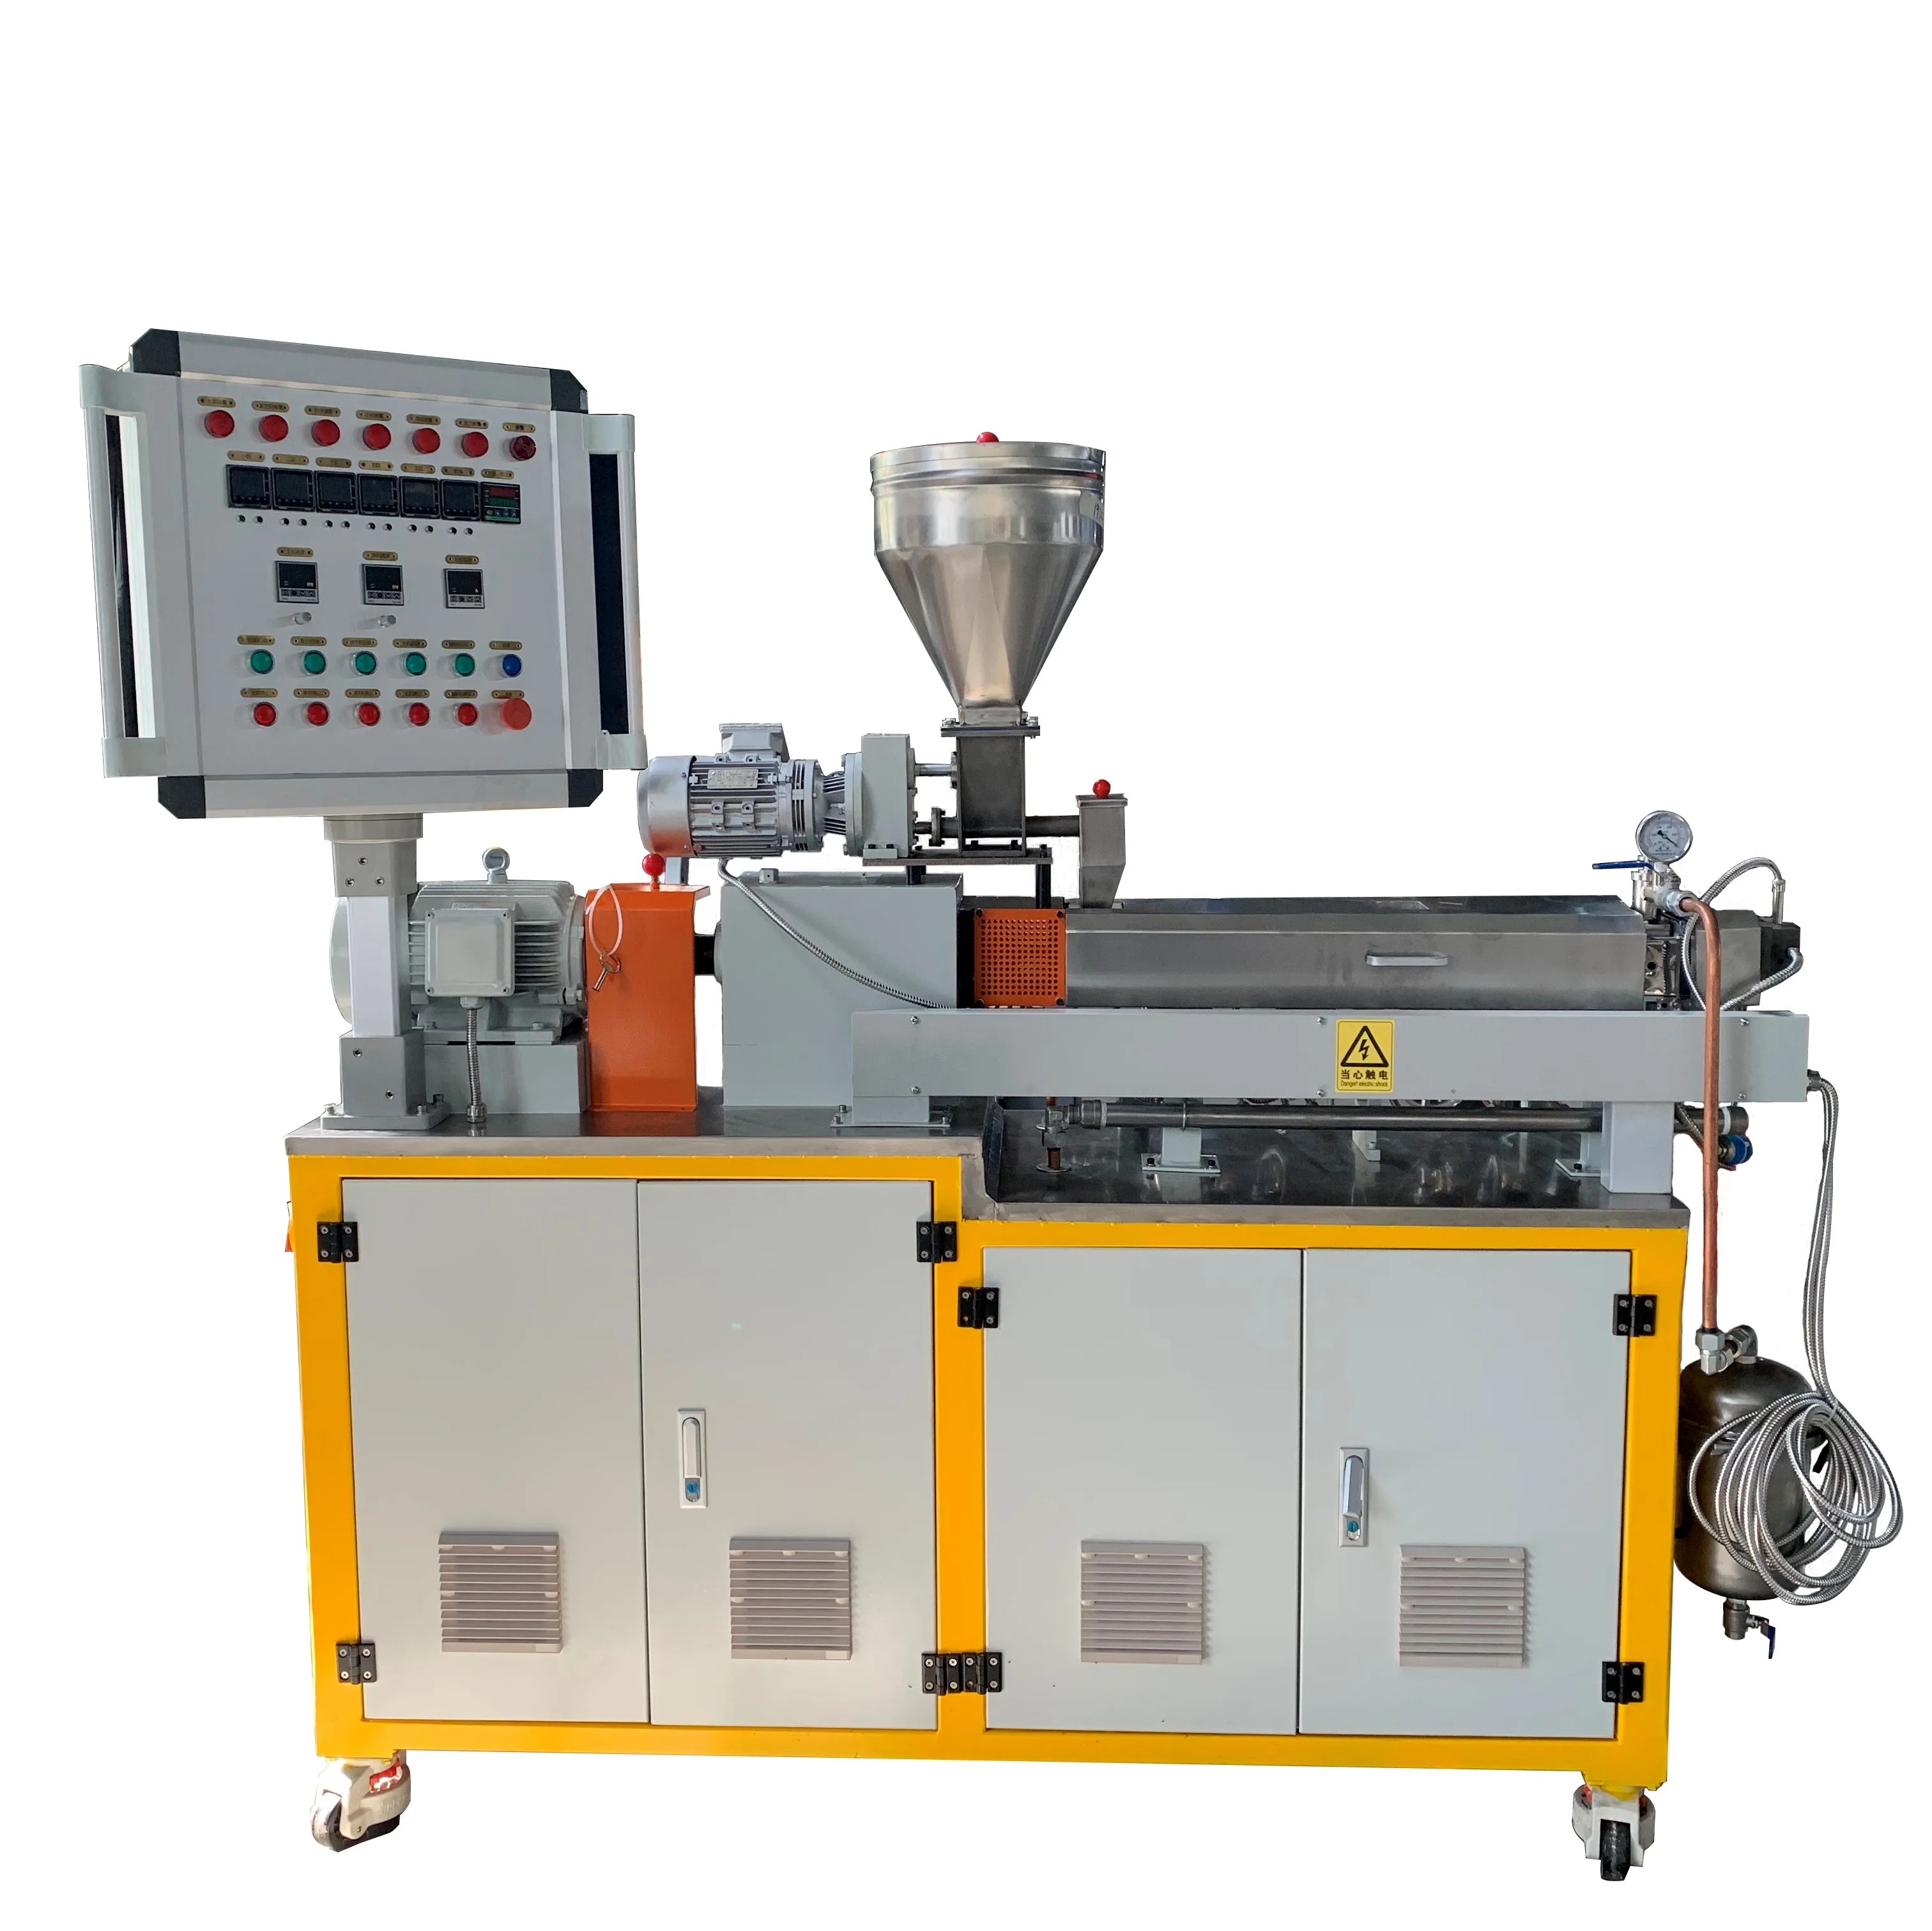 Lab Twin Screw Extruder - Cowin Extrusion